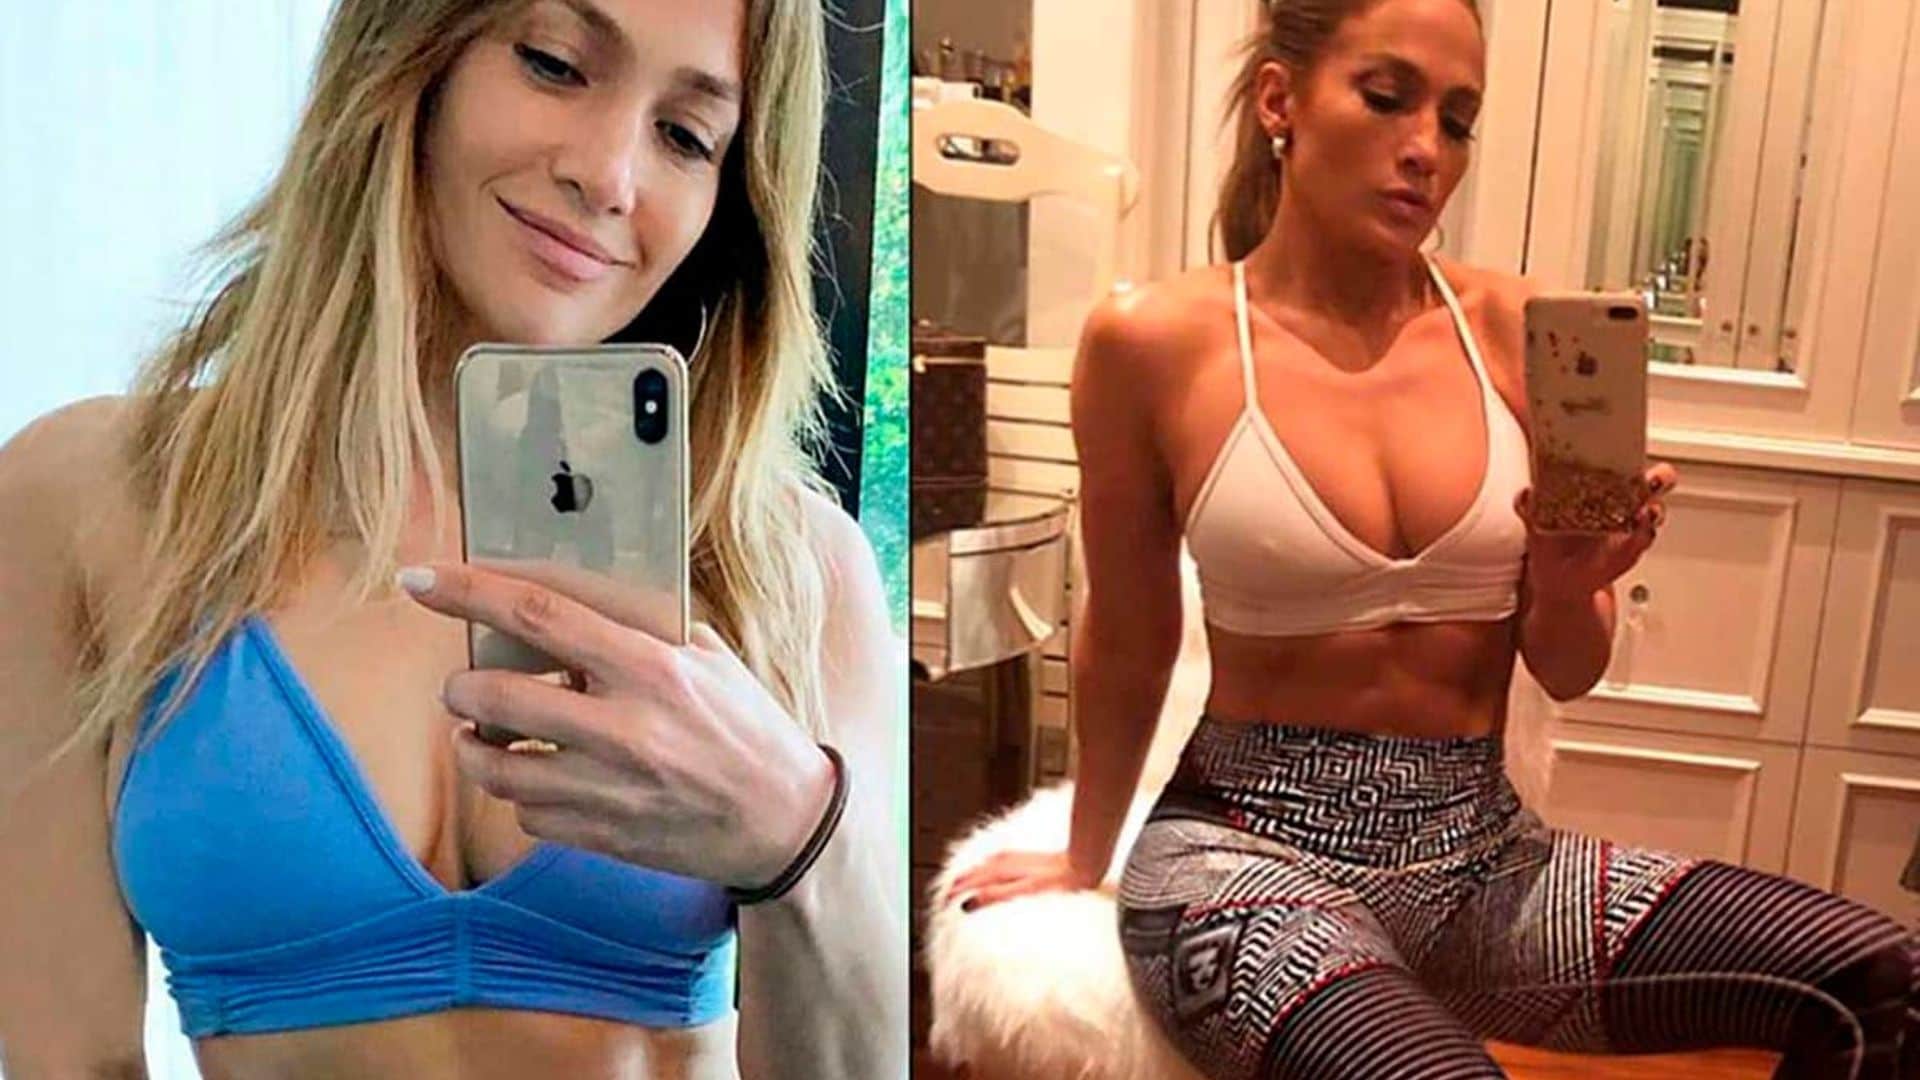 How to look cute at the gym according to Jennifer Lopez